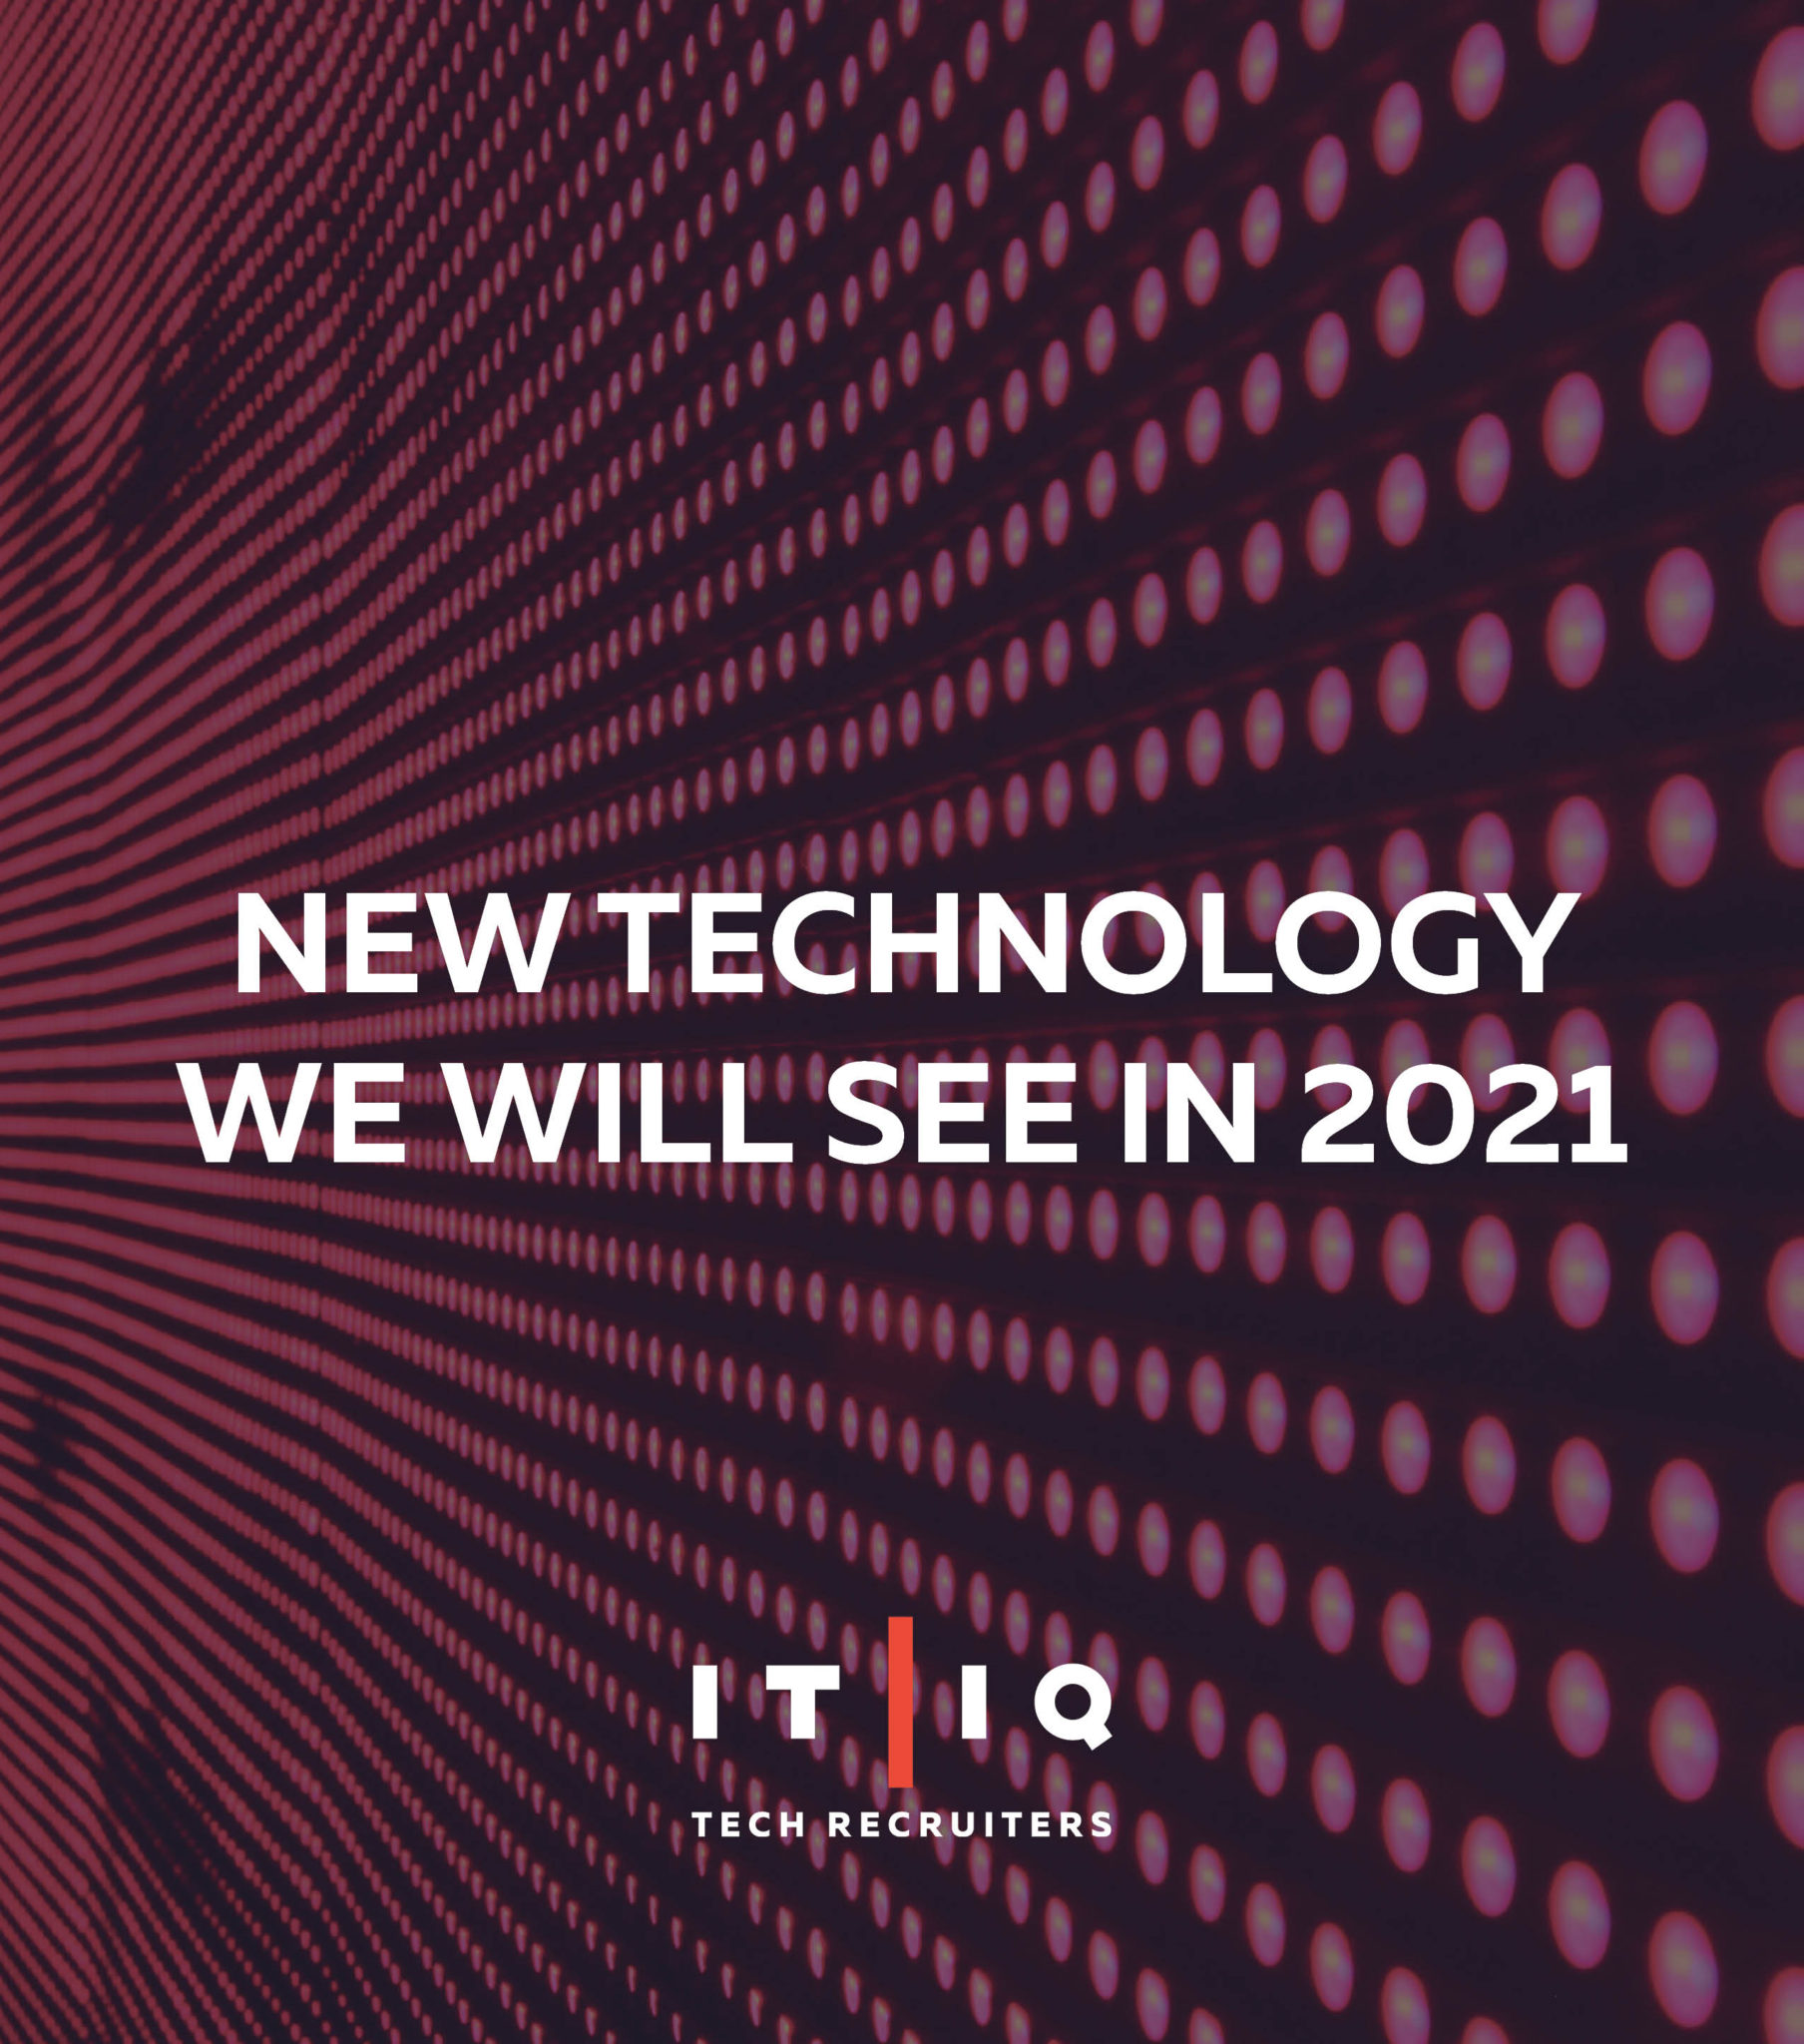 IT/IQ Tech Recruiters new technology we will see in 2021 graphic